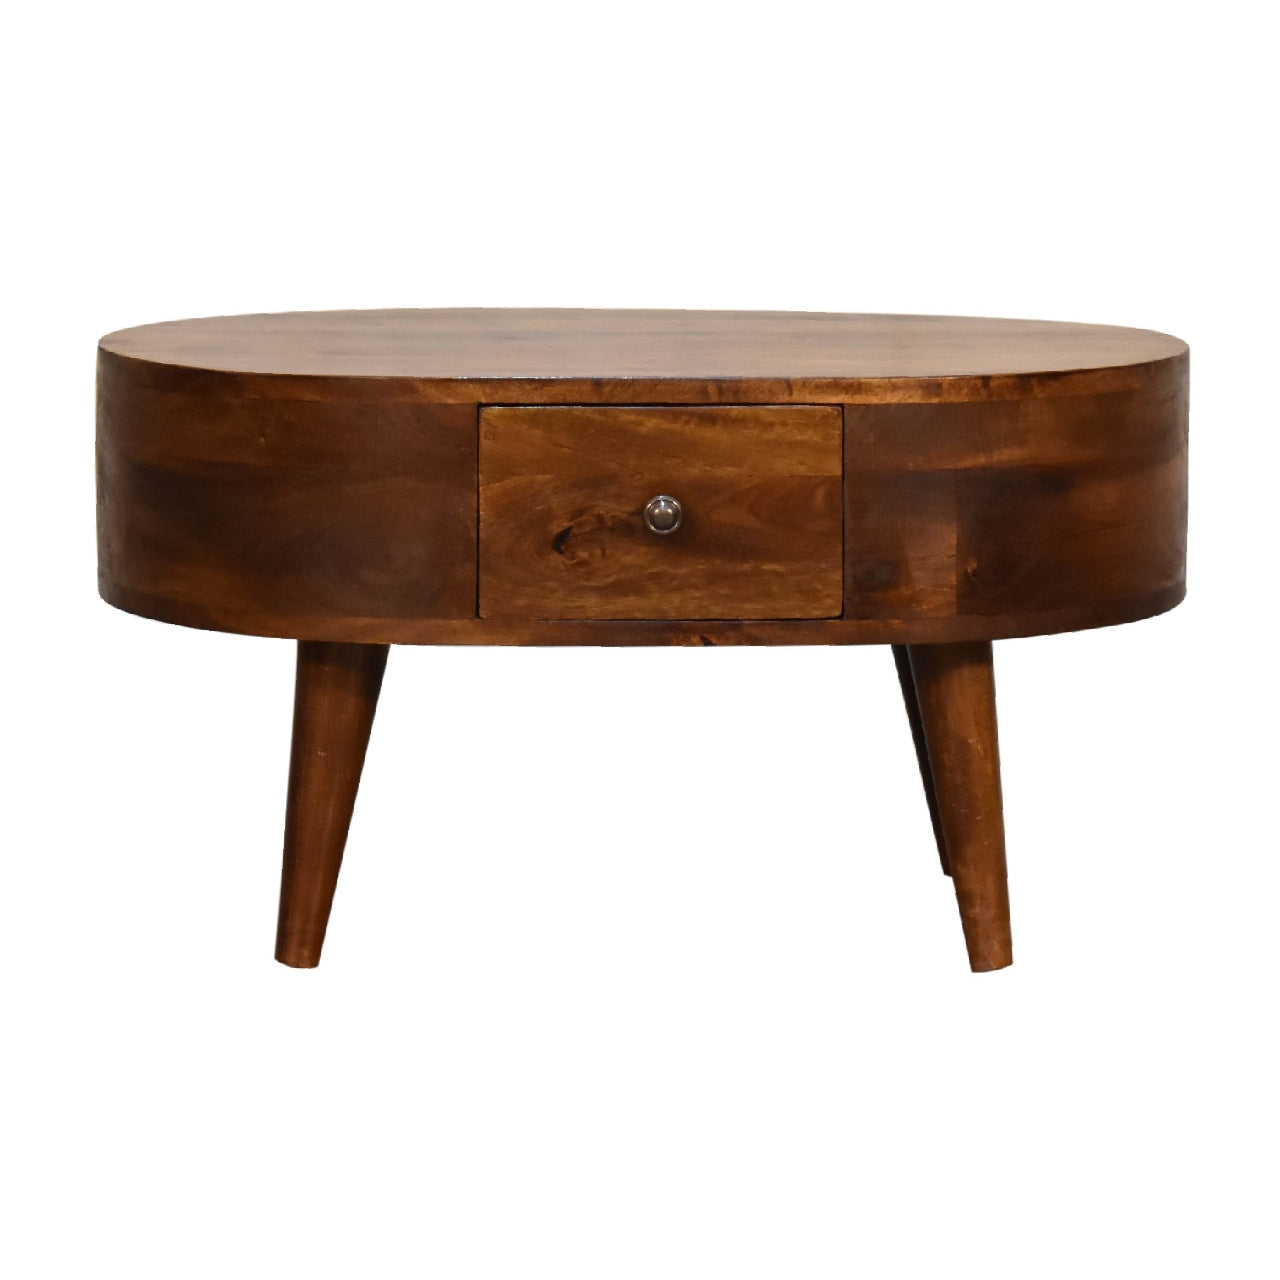 View Mini Chestnut Rounded Coffee Table information